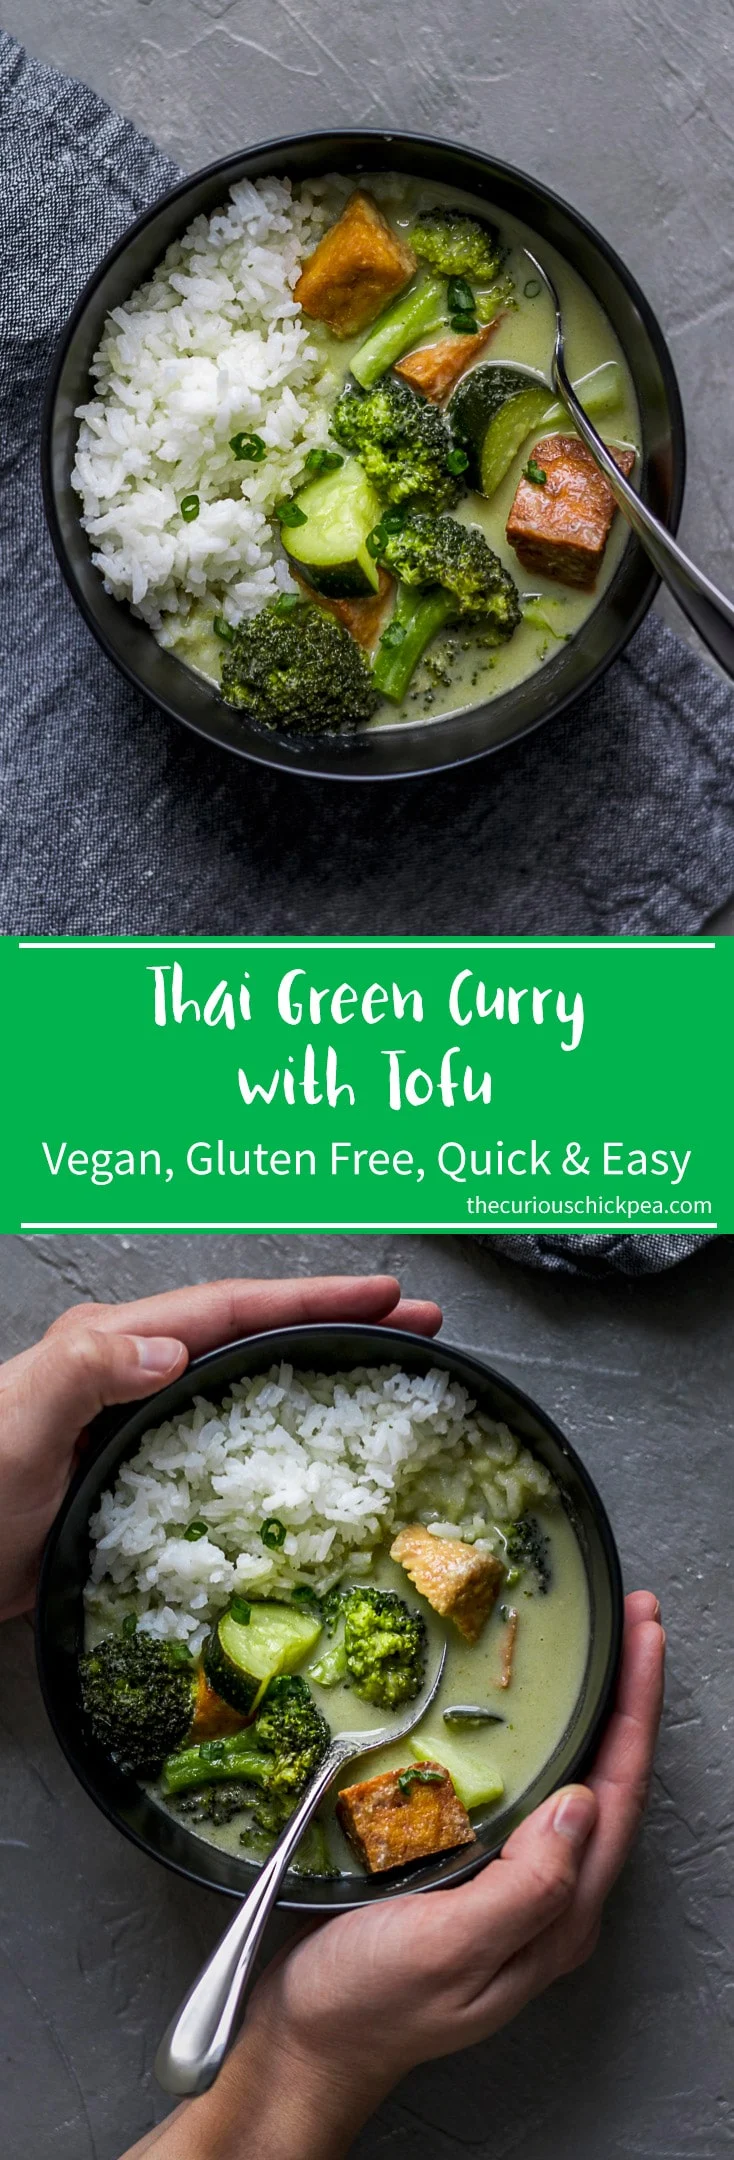 Thai Green Curry with Fried Tofu, Quick and Easy Vegan and Gluten Free recipe | thecuriouschickpea.com